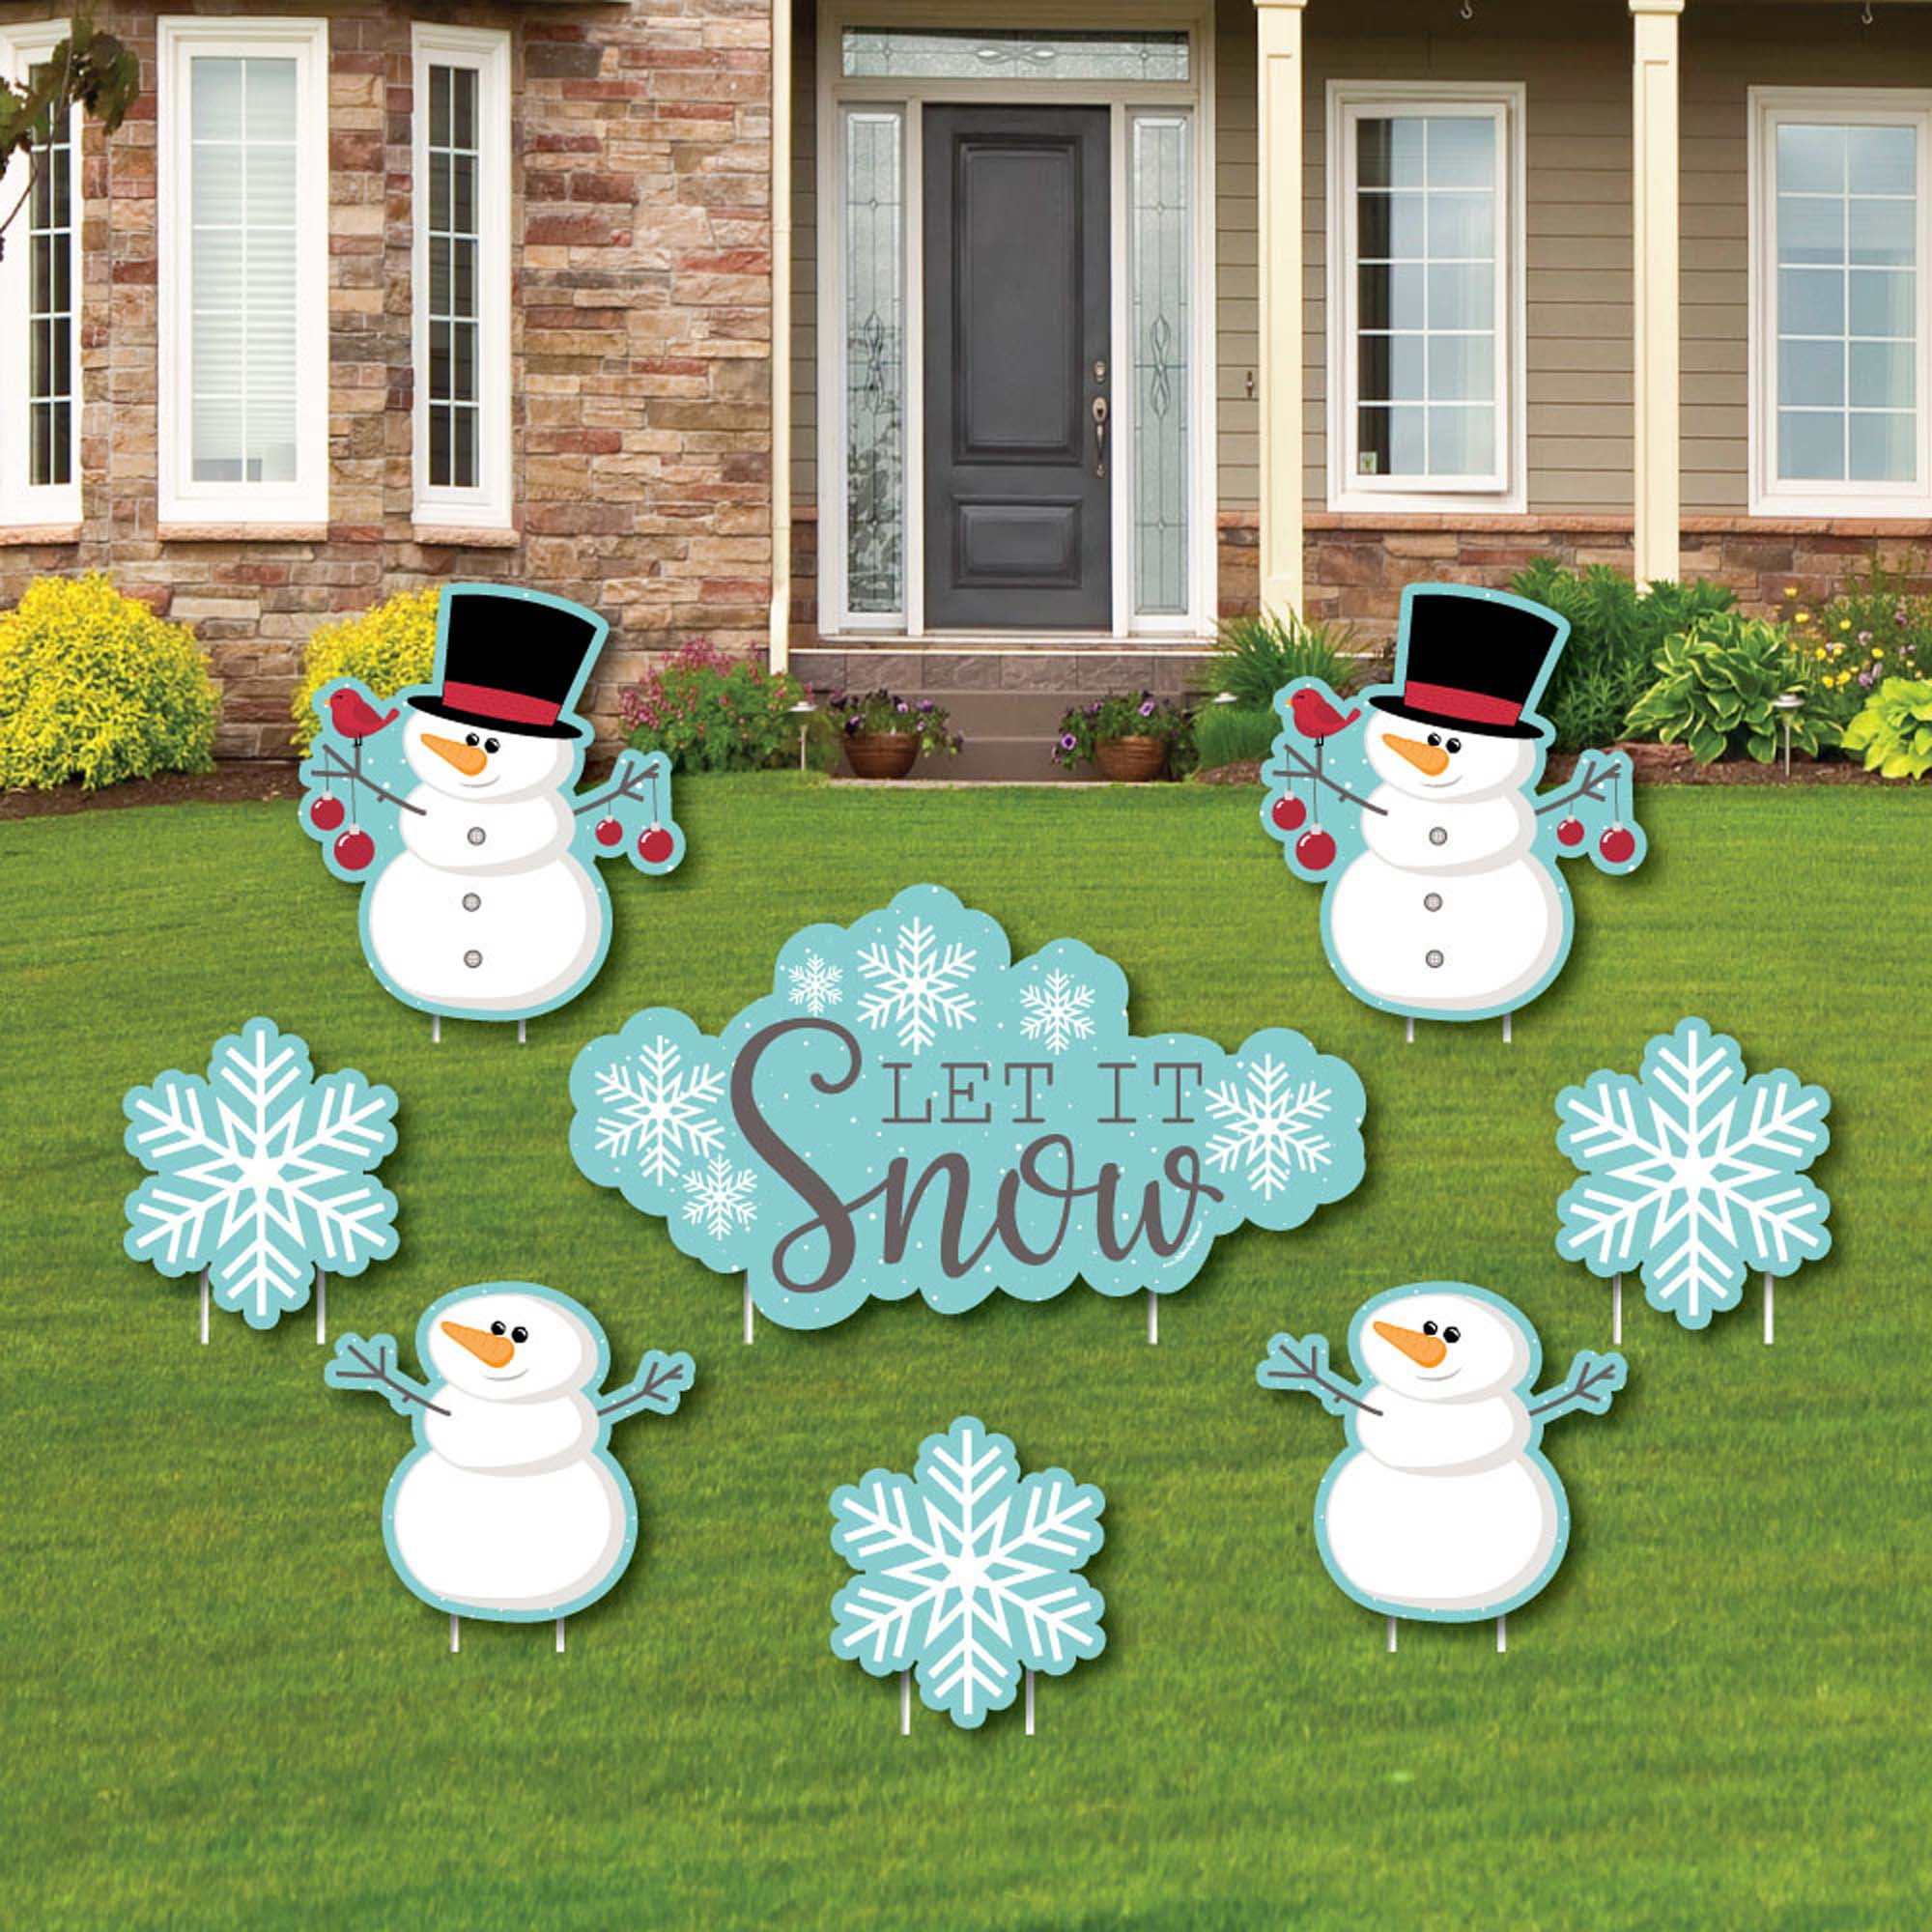 Snowman Family Yard Stake Snow Frosty Figure Christmas Holiday Outdoor Art Decor 